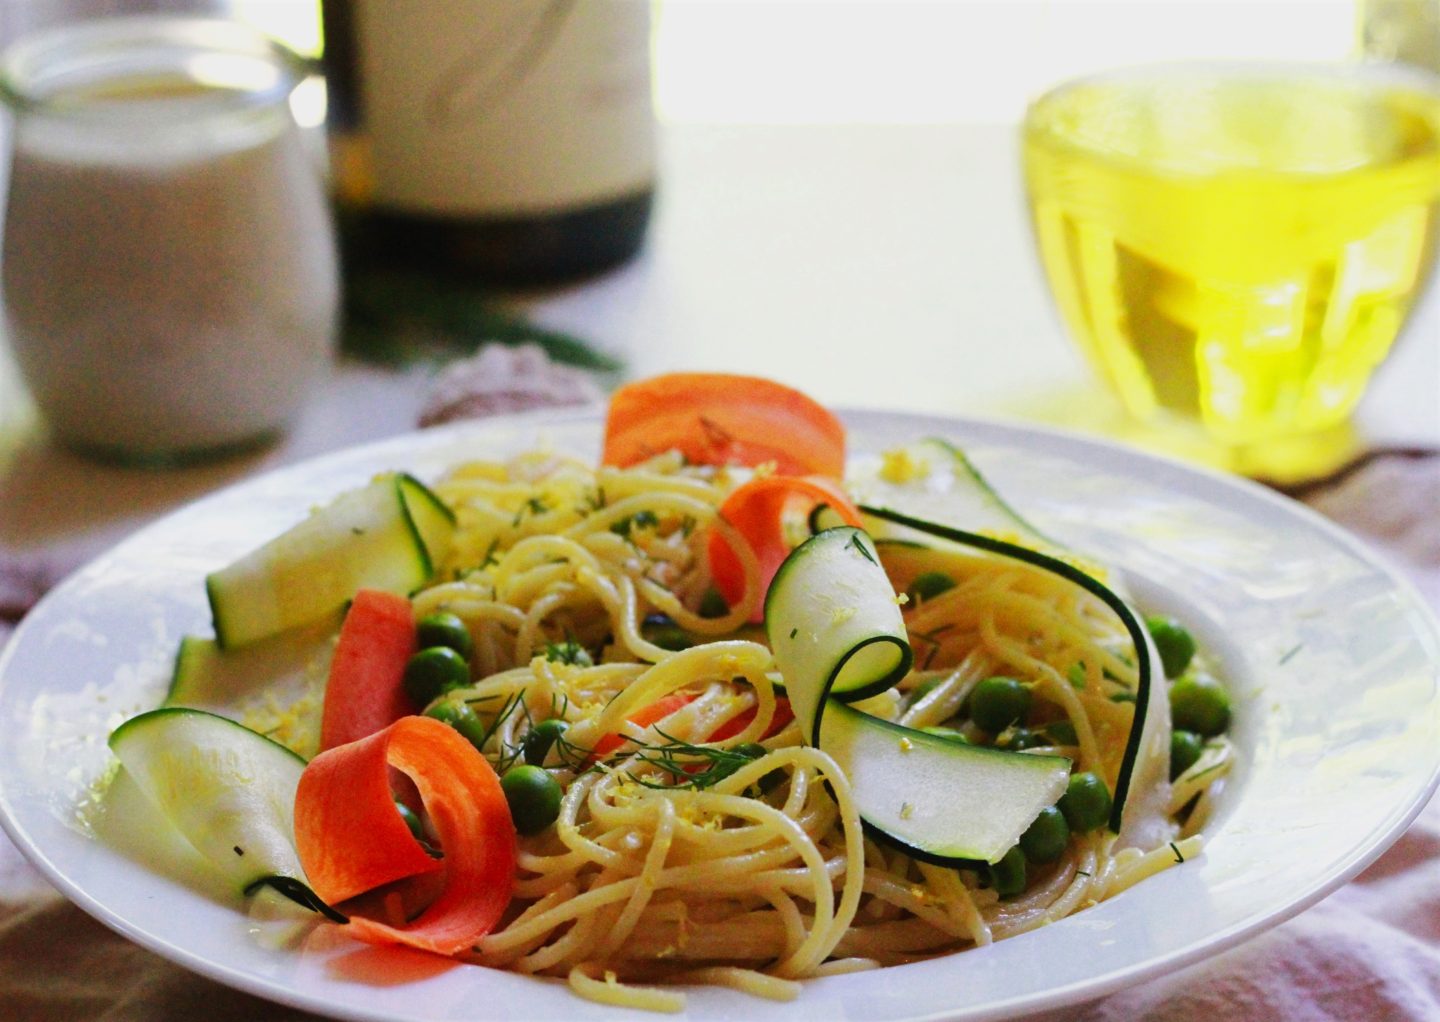 Lemon Dill Pasta with wine bottle and wine glass